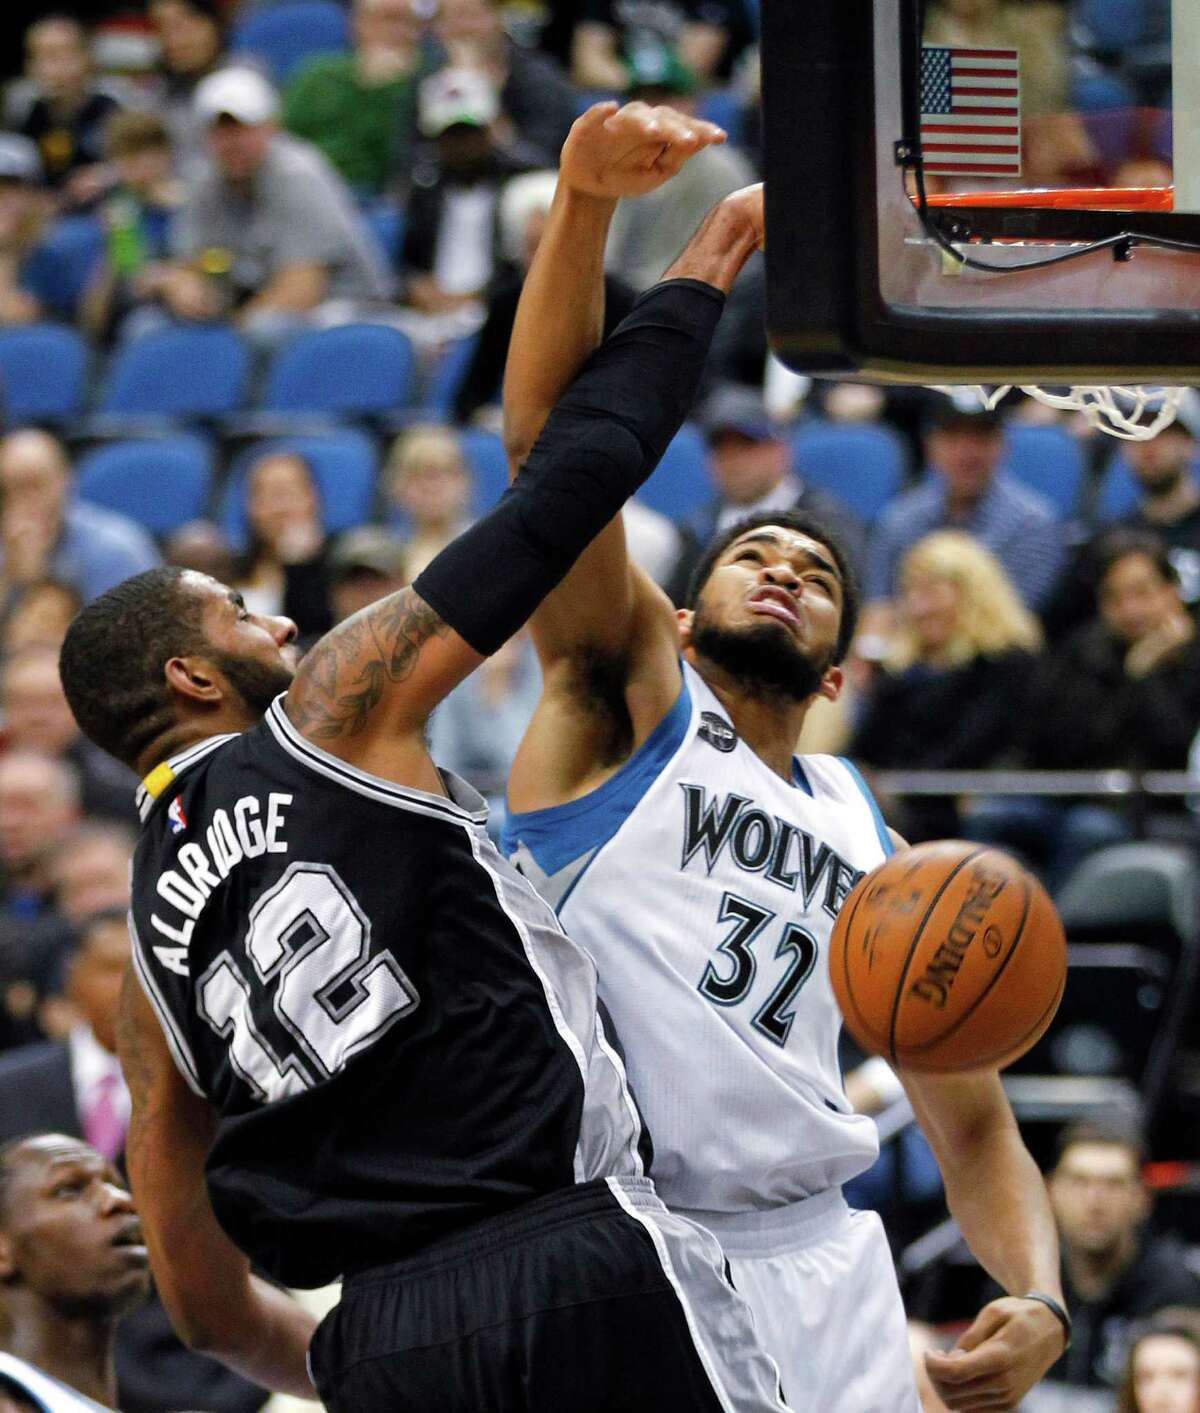 San Antonio Spurs forward LaMarcus Aldridge (12) dunks in front of Minnesota Timberwolves forward Karl-Anthony Towns (32) during the first quarter of an NBA basketball game Tuesday, March 8, 2016, in Minneapolis. (AP Photo/Andy Clayton-King)